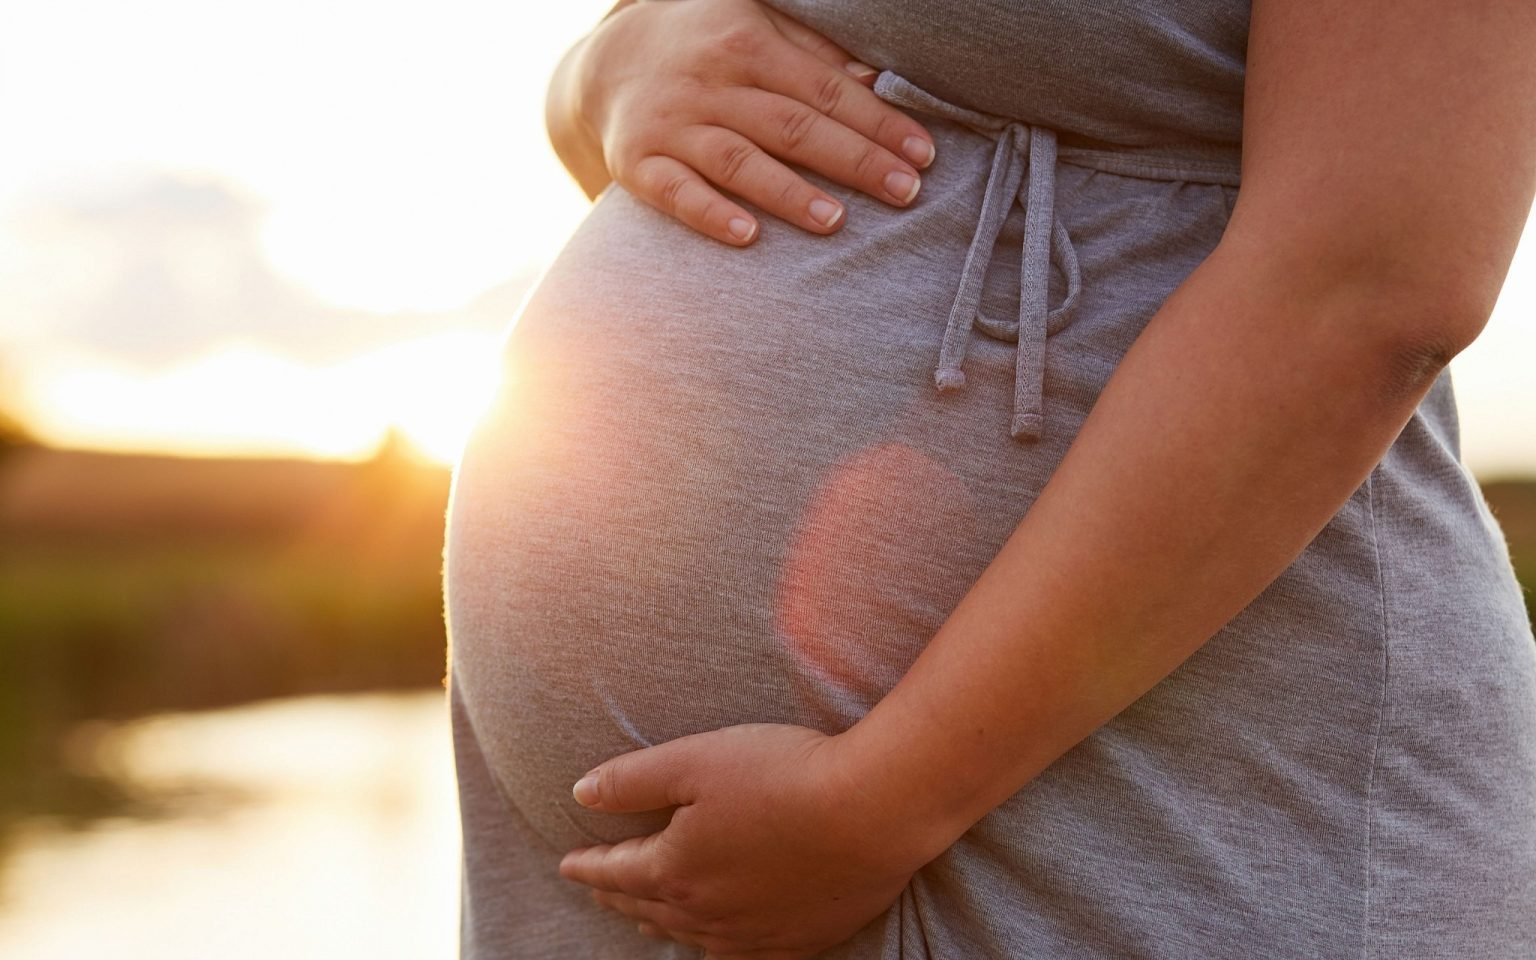 8-common-pregnancy-facts-and-myths-busted-2020-updated-allure-yourself